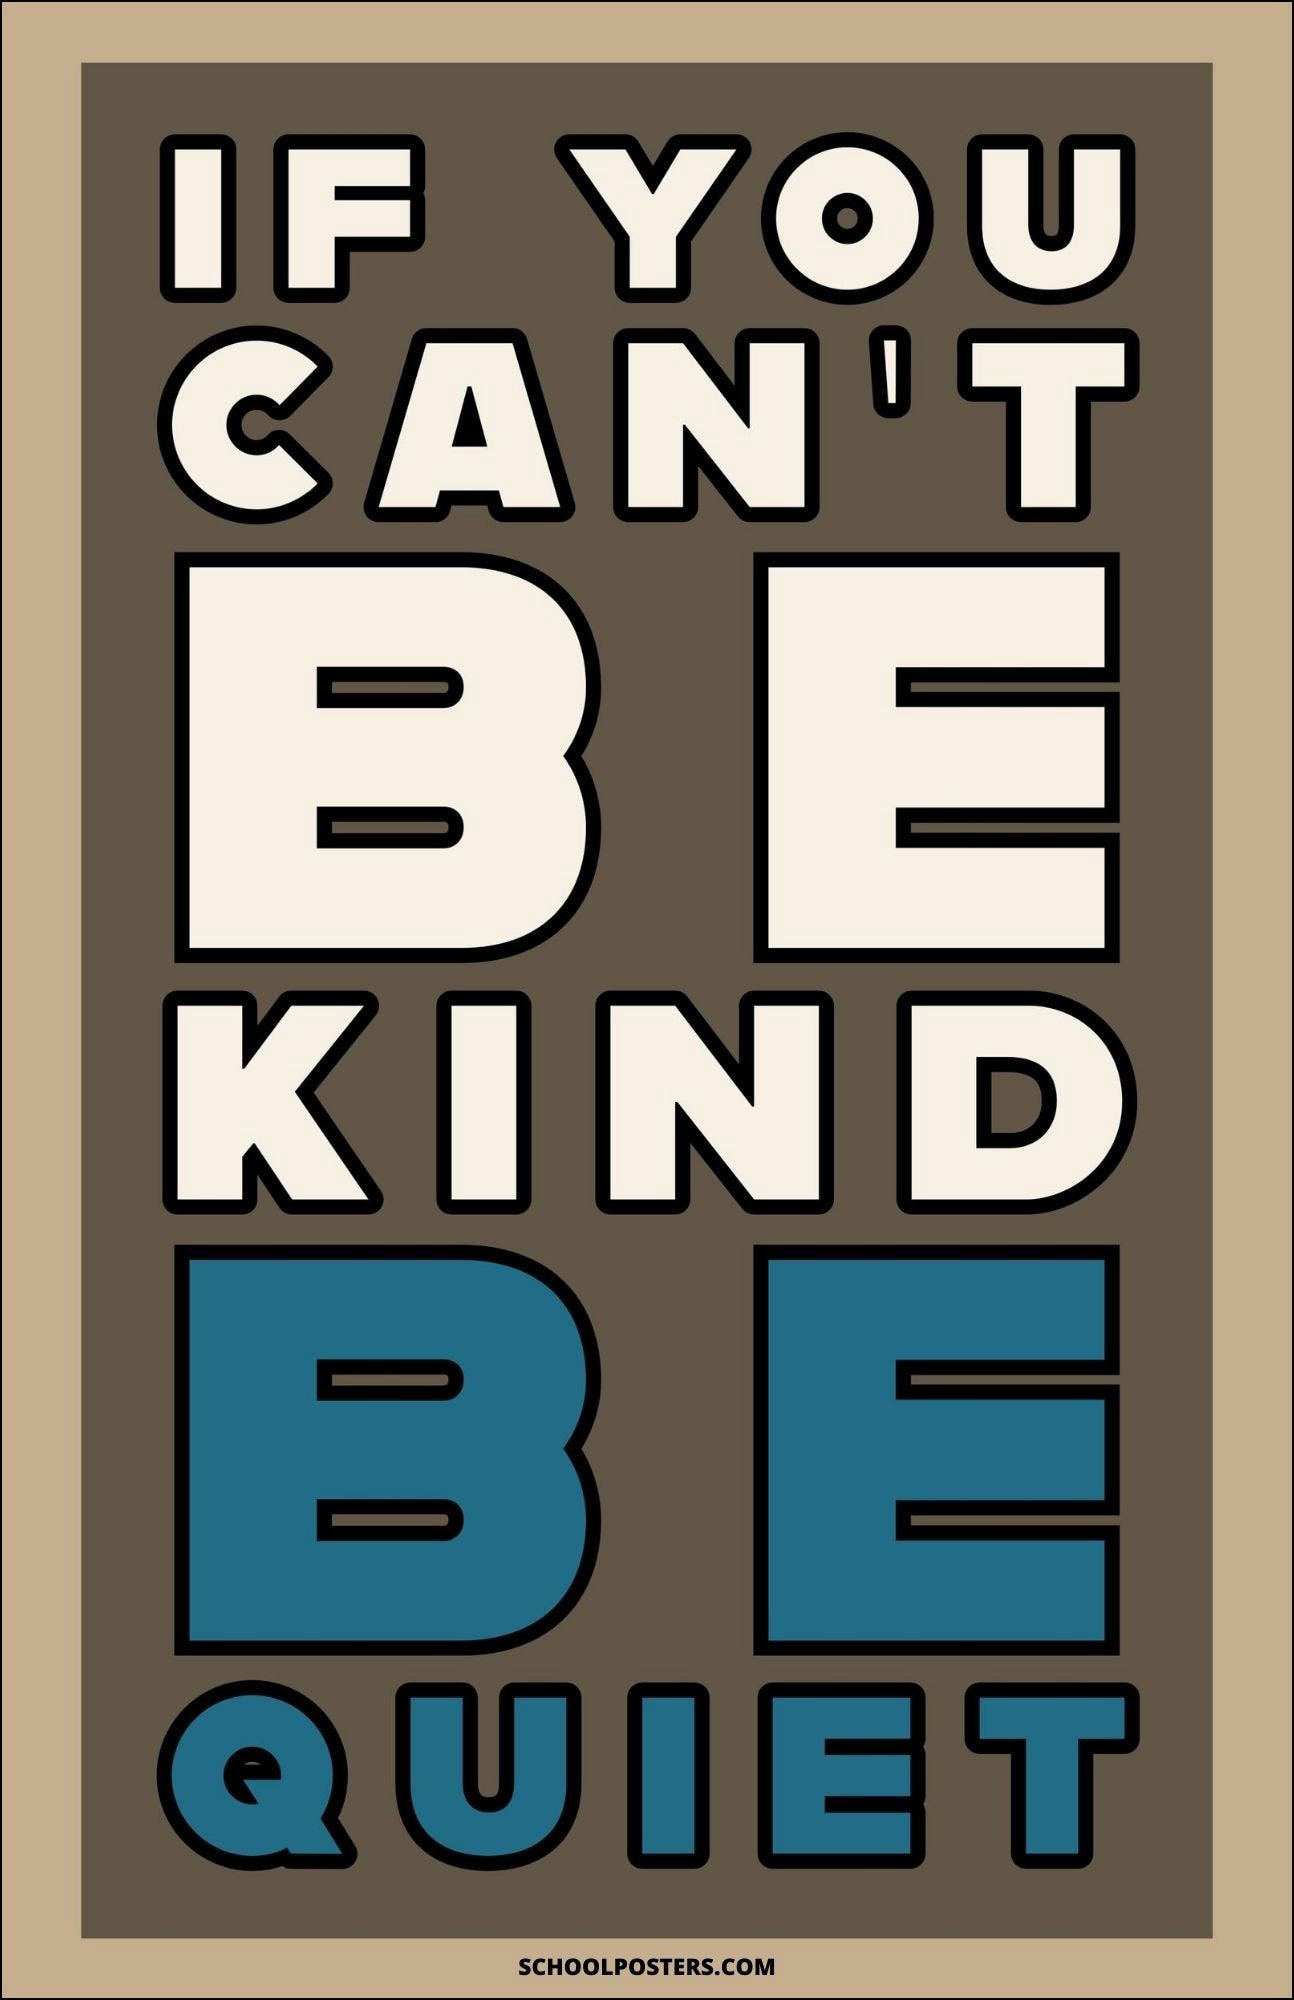 If You Cant Be Kind Be Quiet Poster